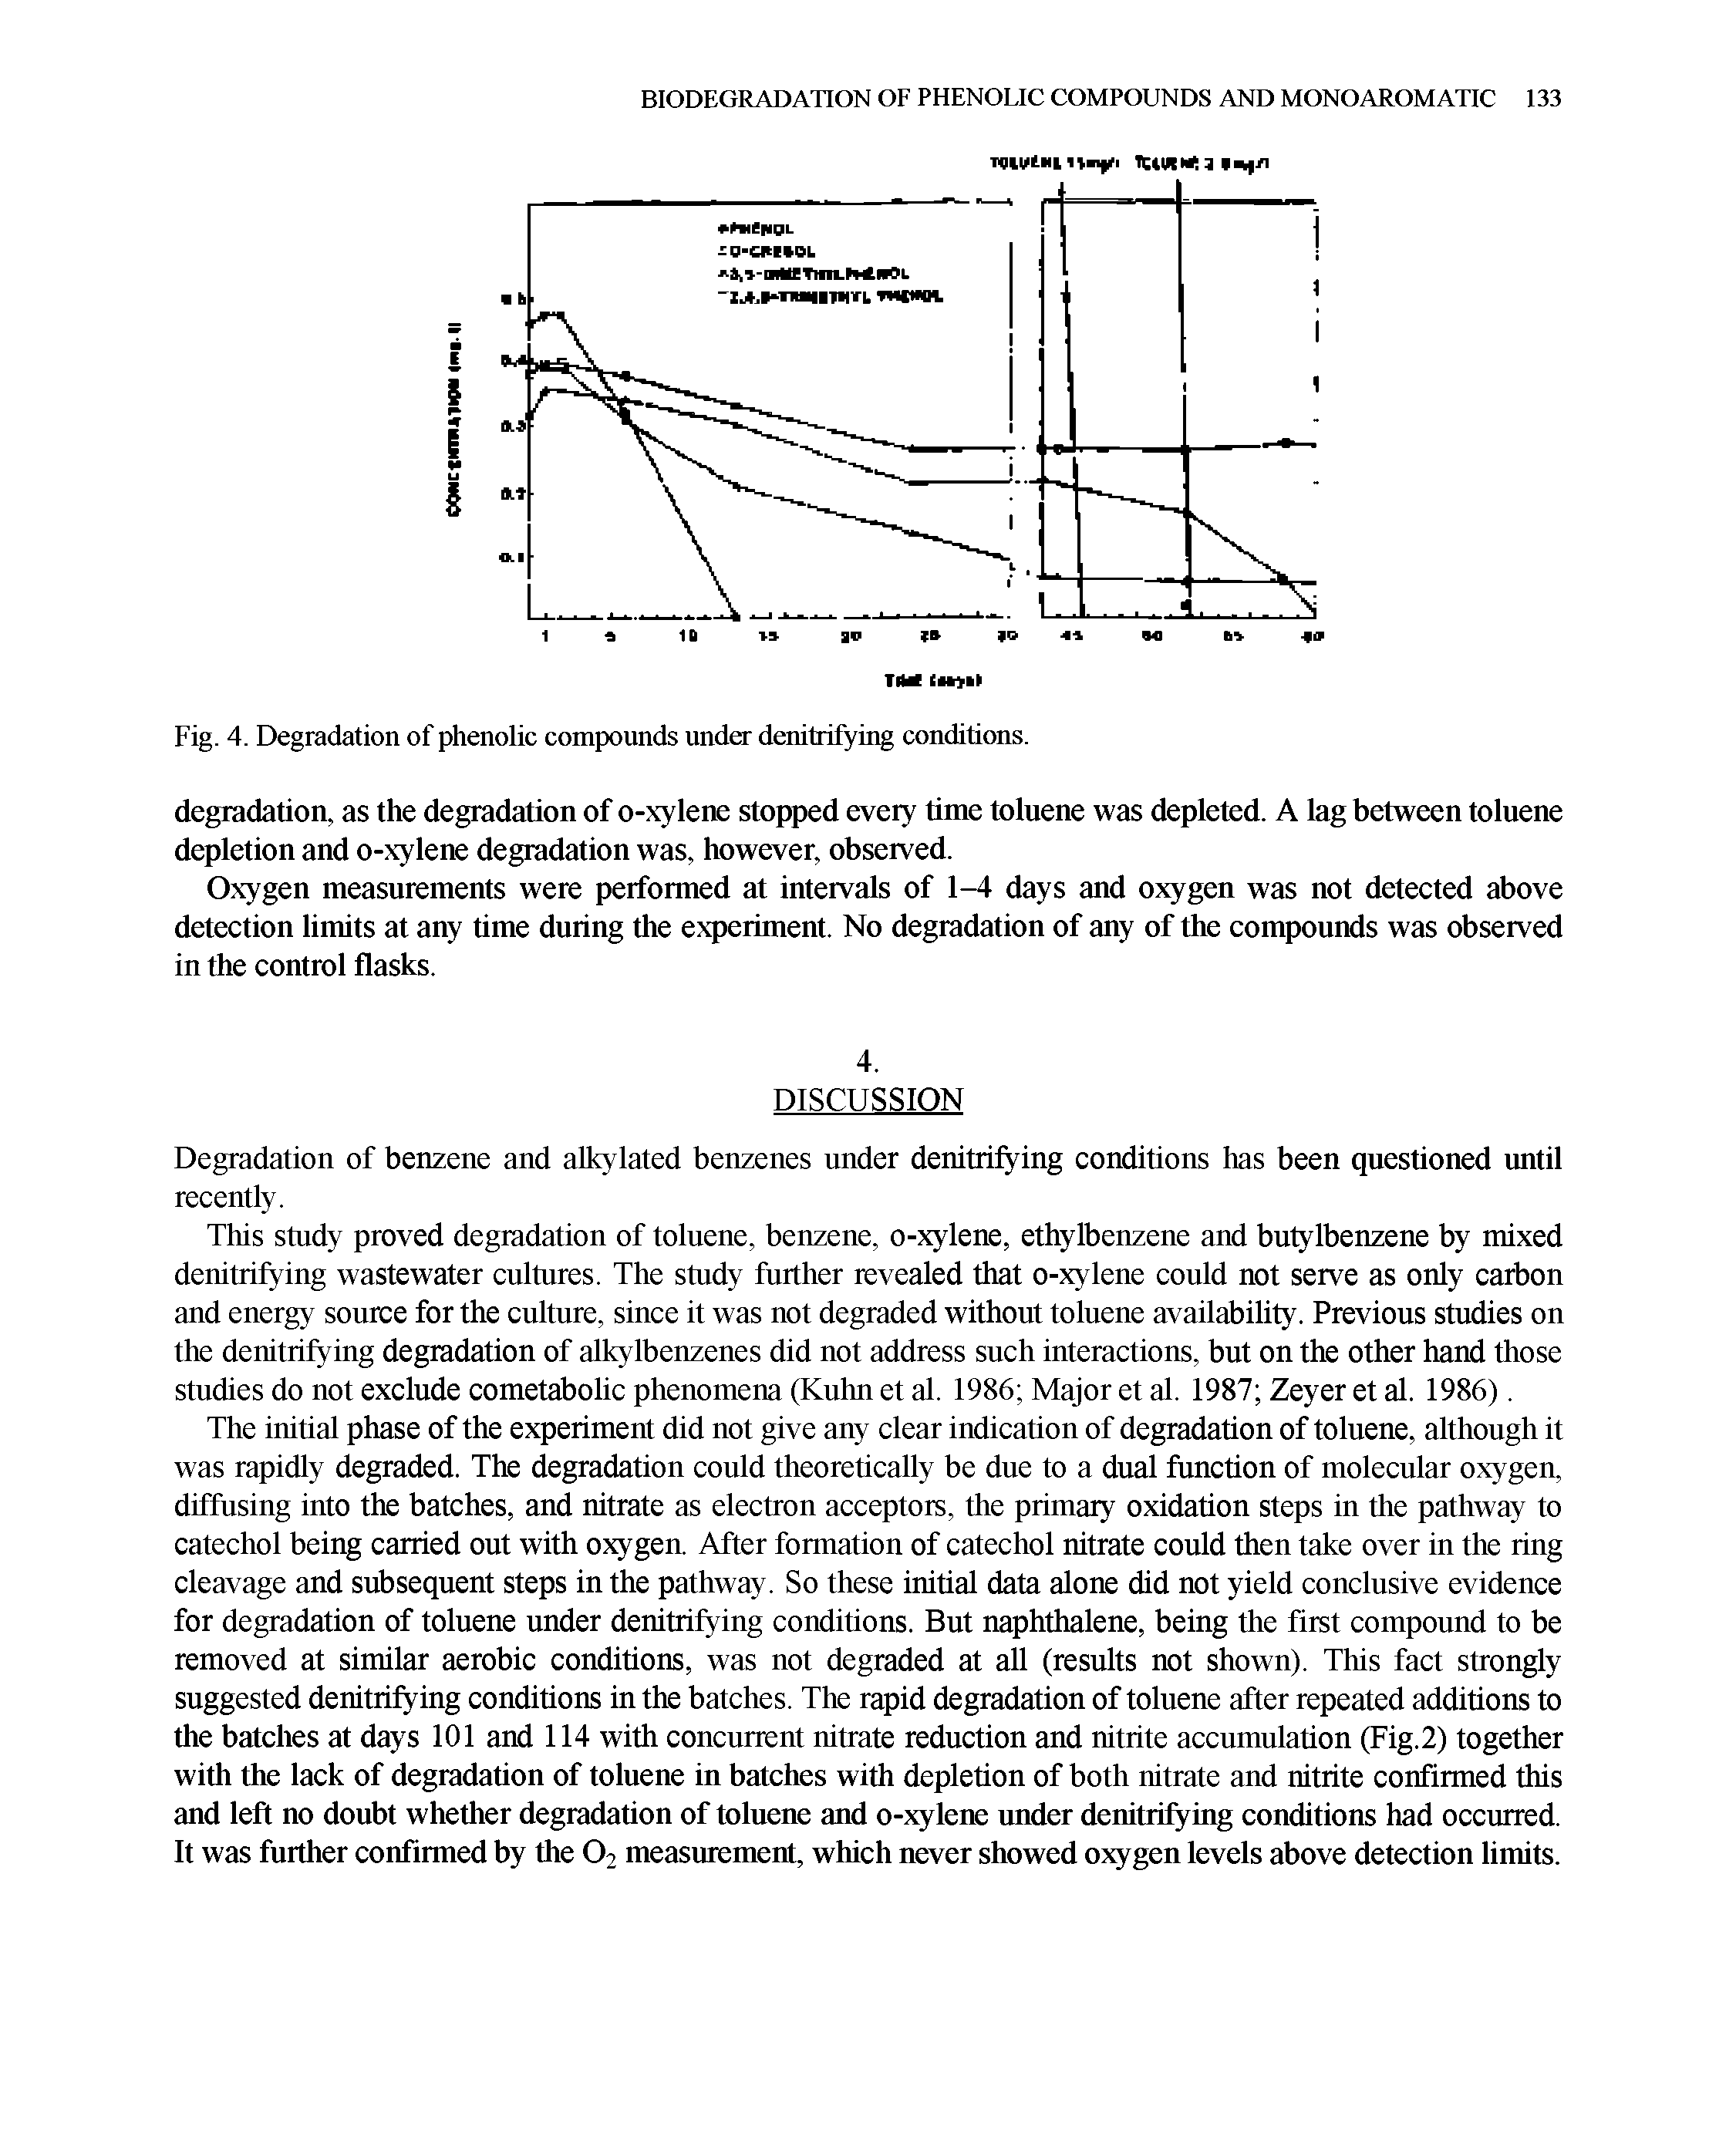 Fig. 4. Degradation of phenolic compounds under denitrifying conditions.